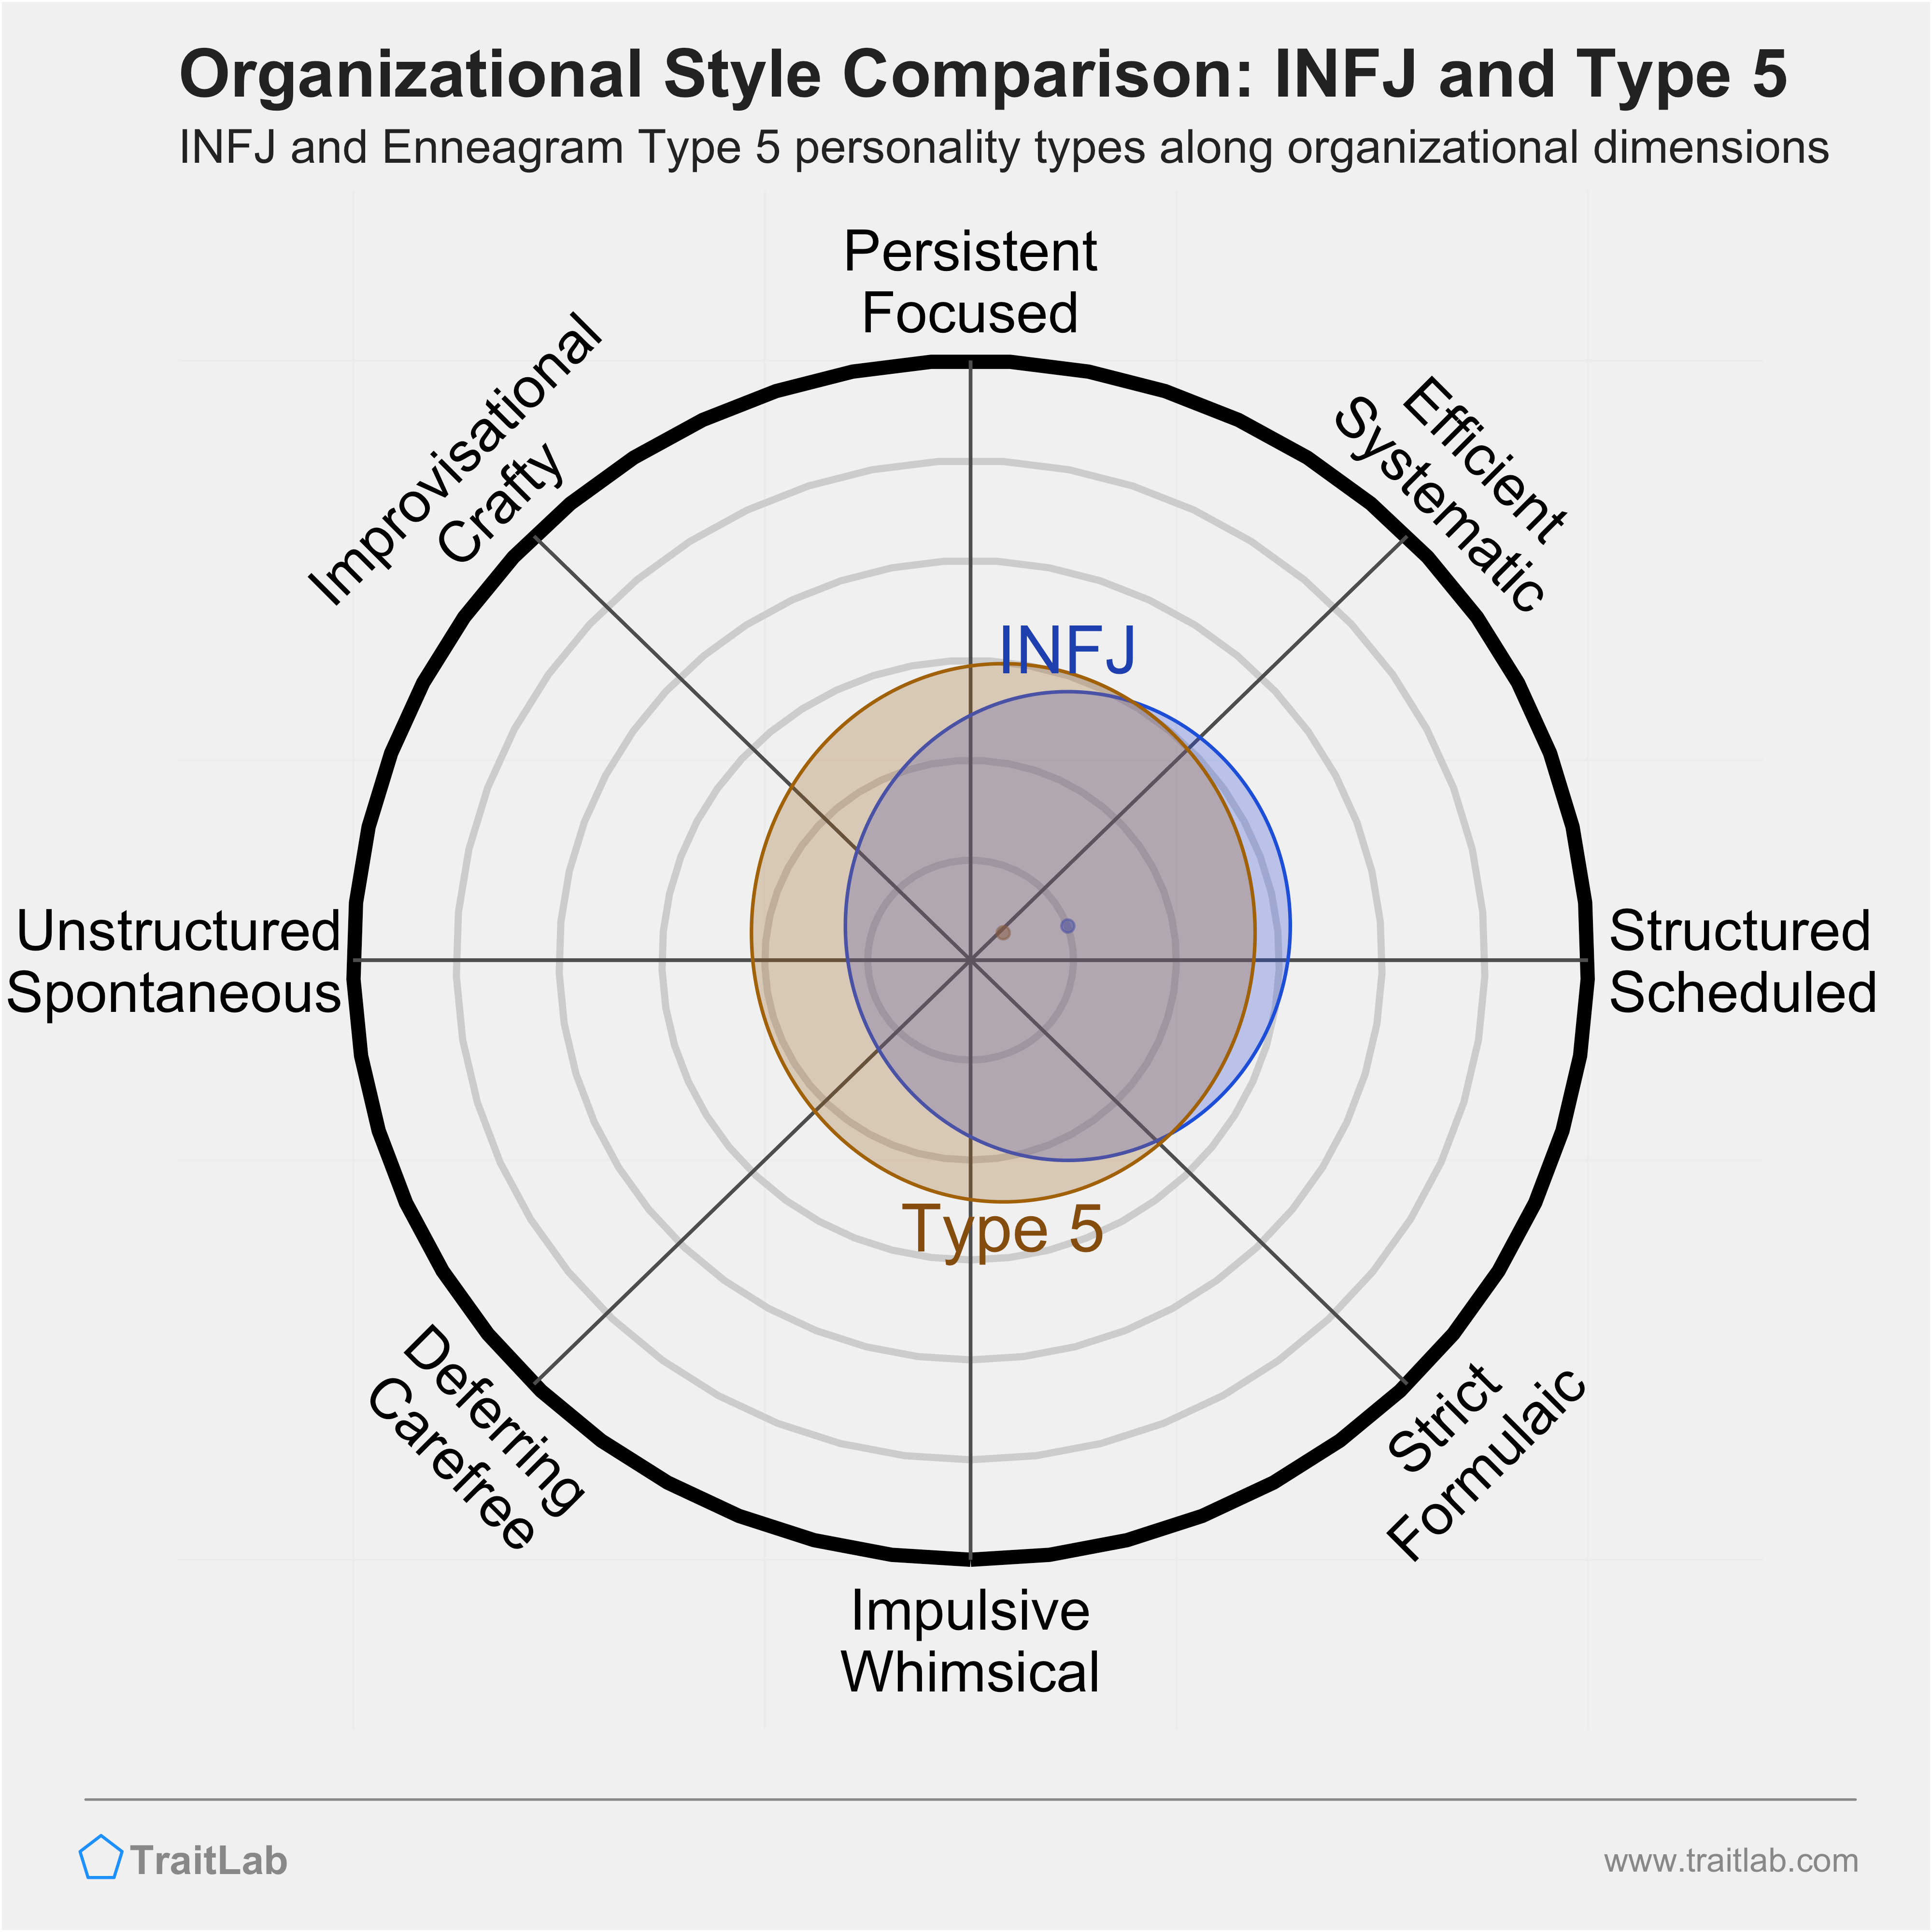 INFJ and Type 5 comparison across organizational dimensions